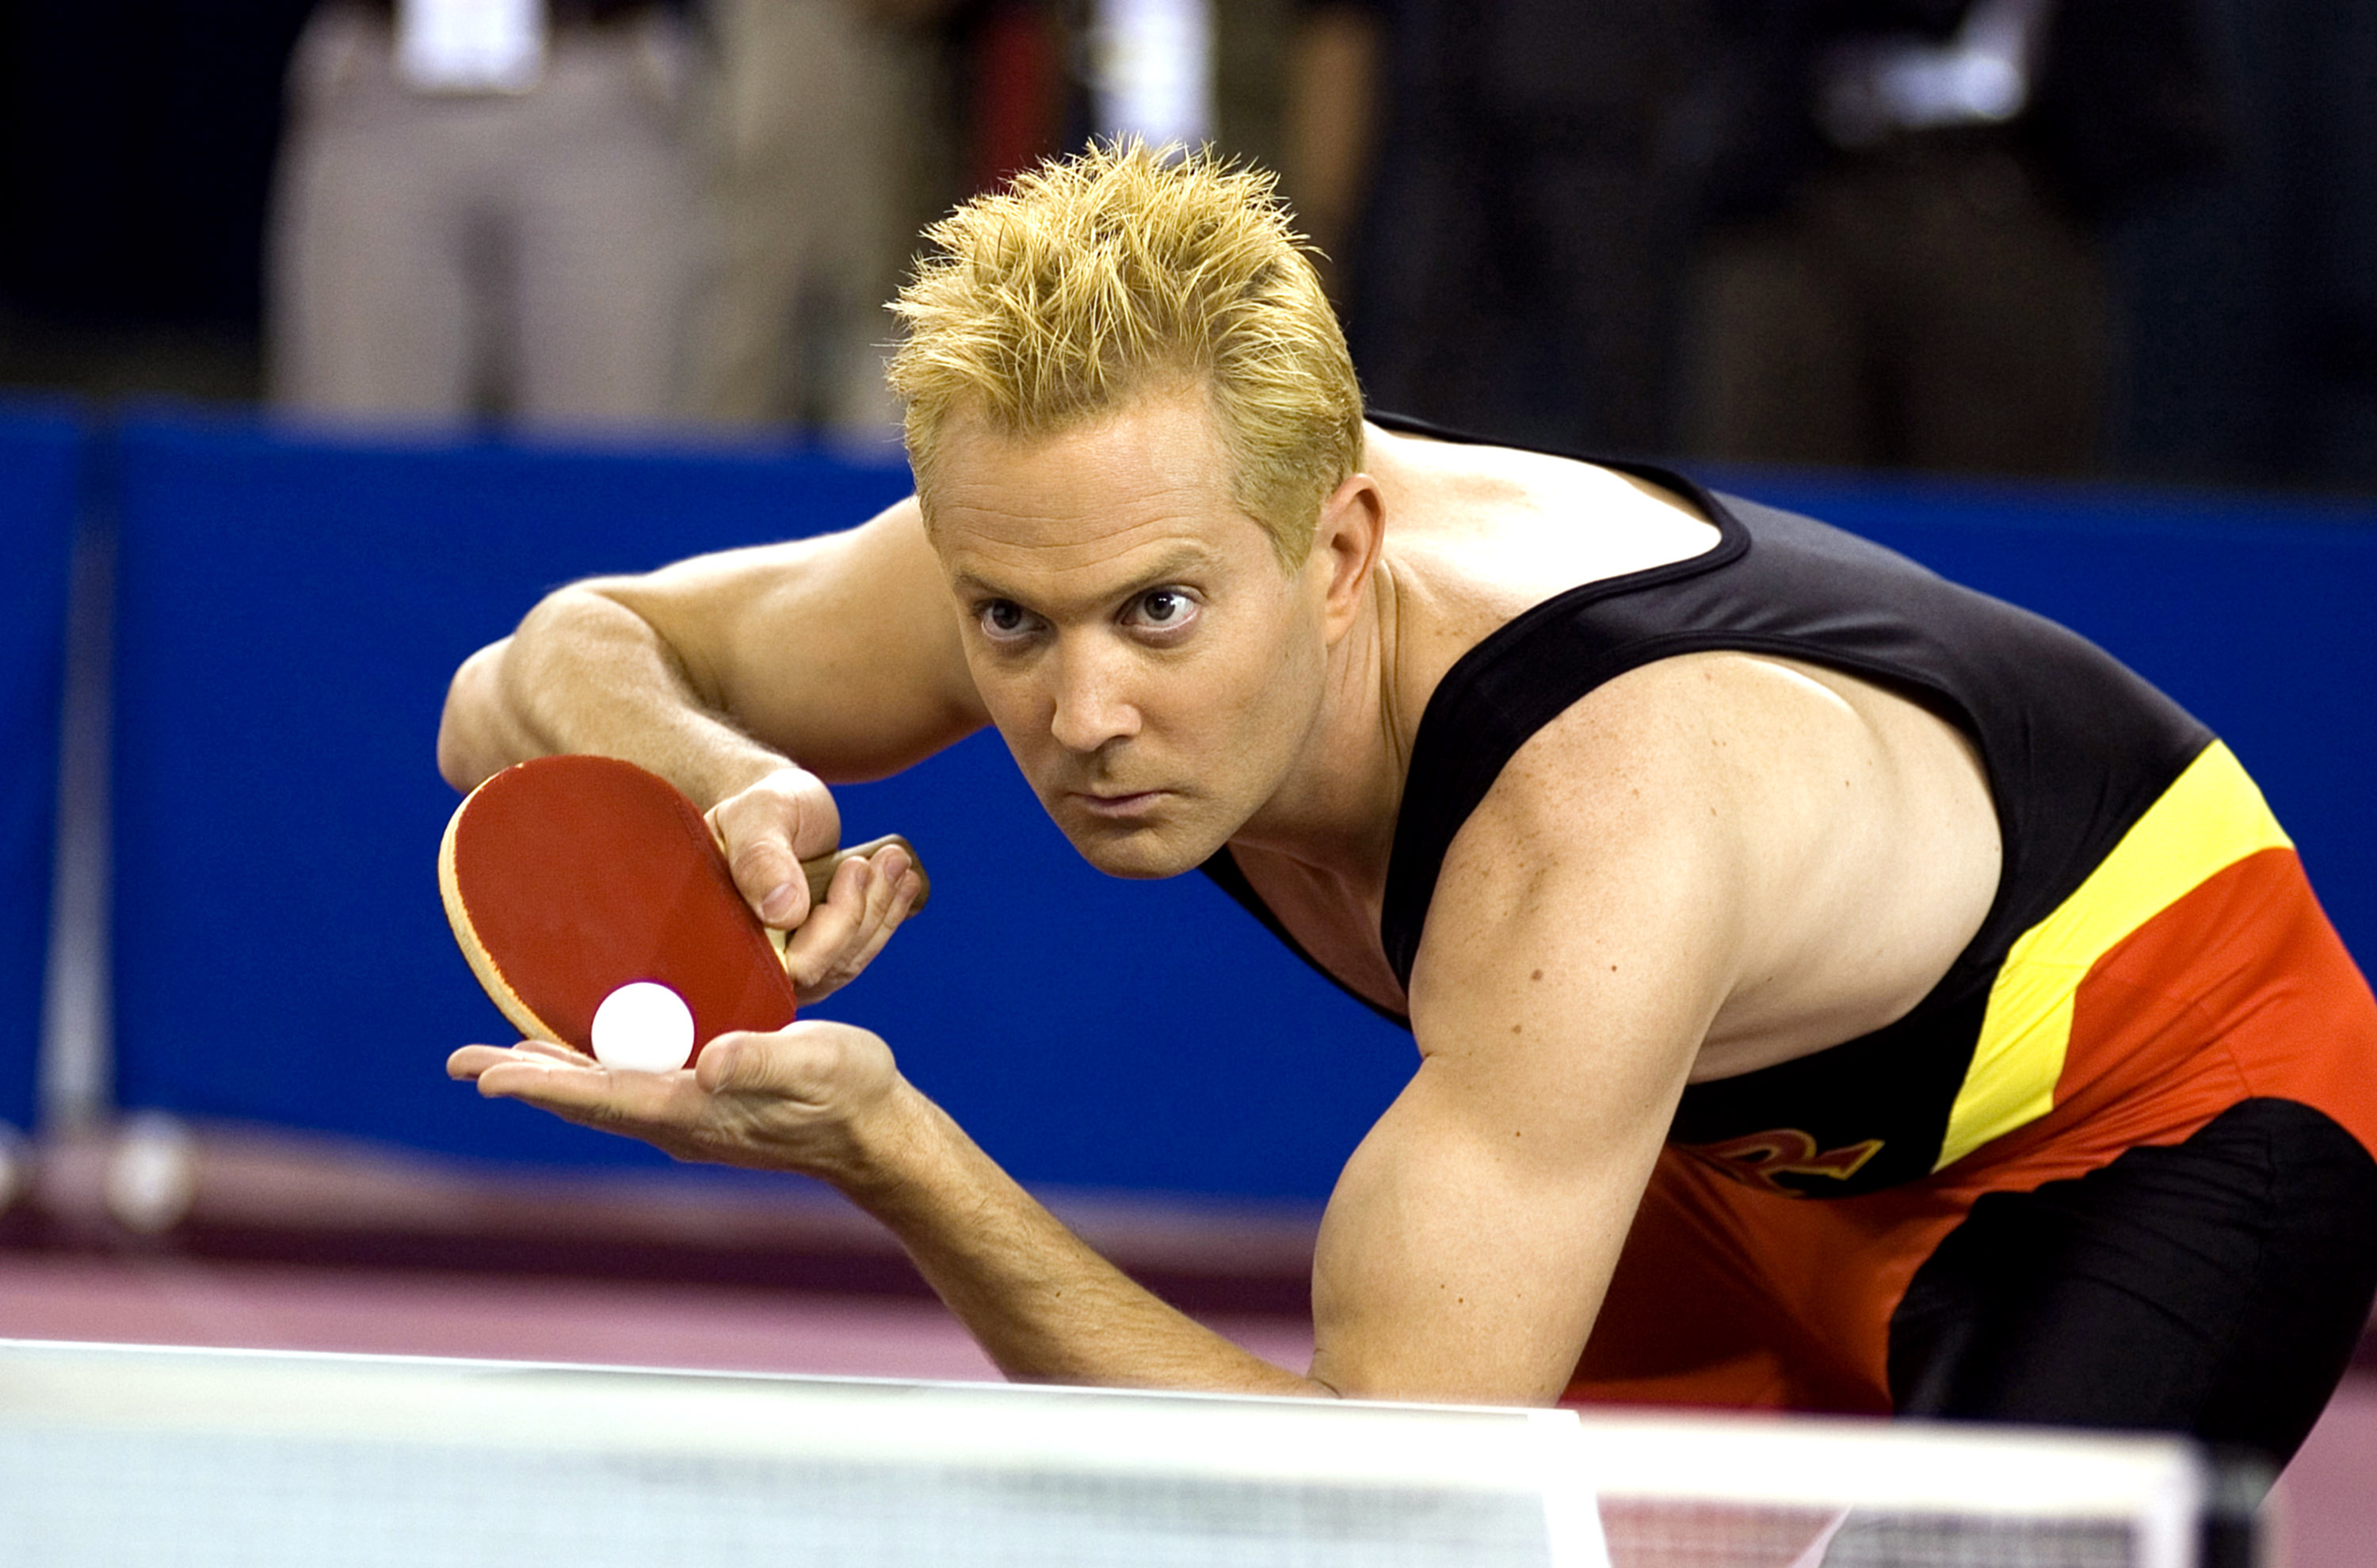 _Guess it's back to Russian ping pong_